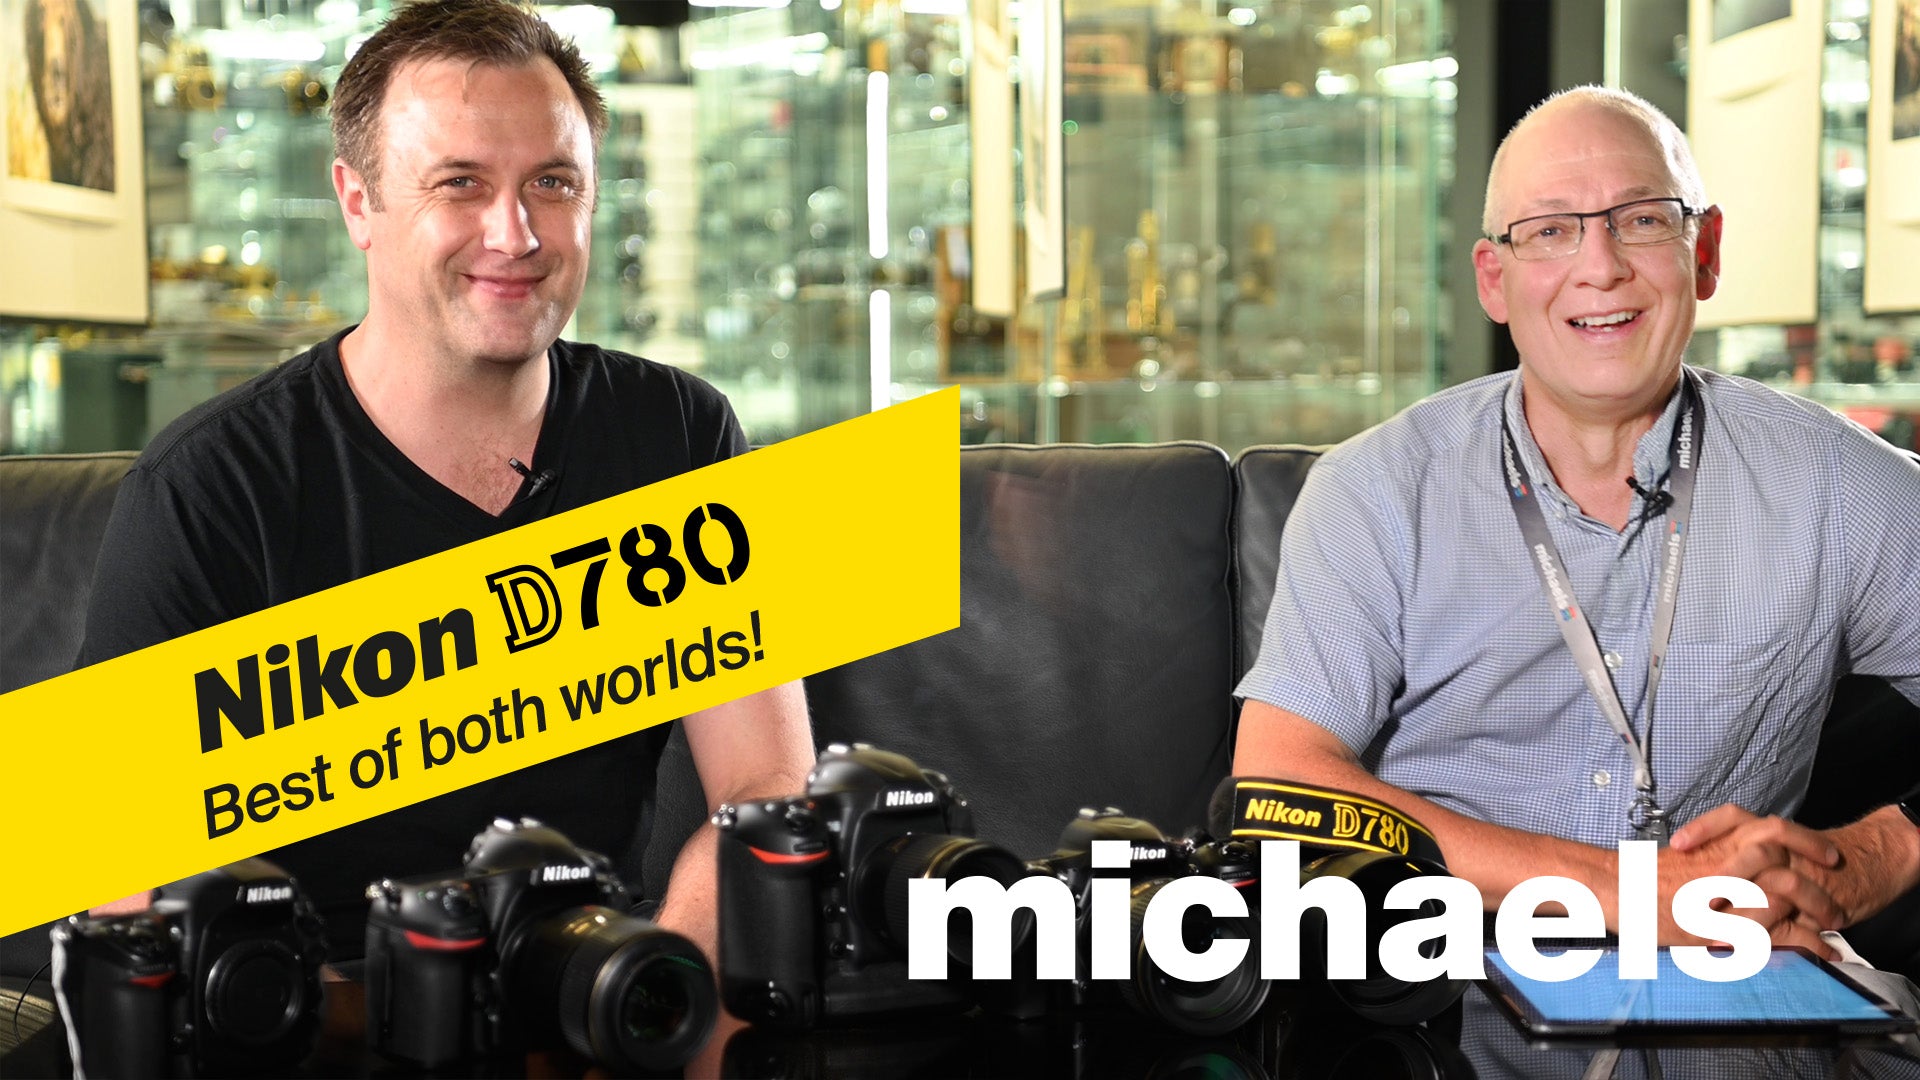 Introducing the Nikon D780 — the best of both worlds. DSLR and Mirrorless in one camera!